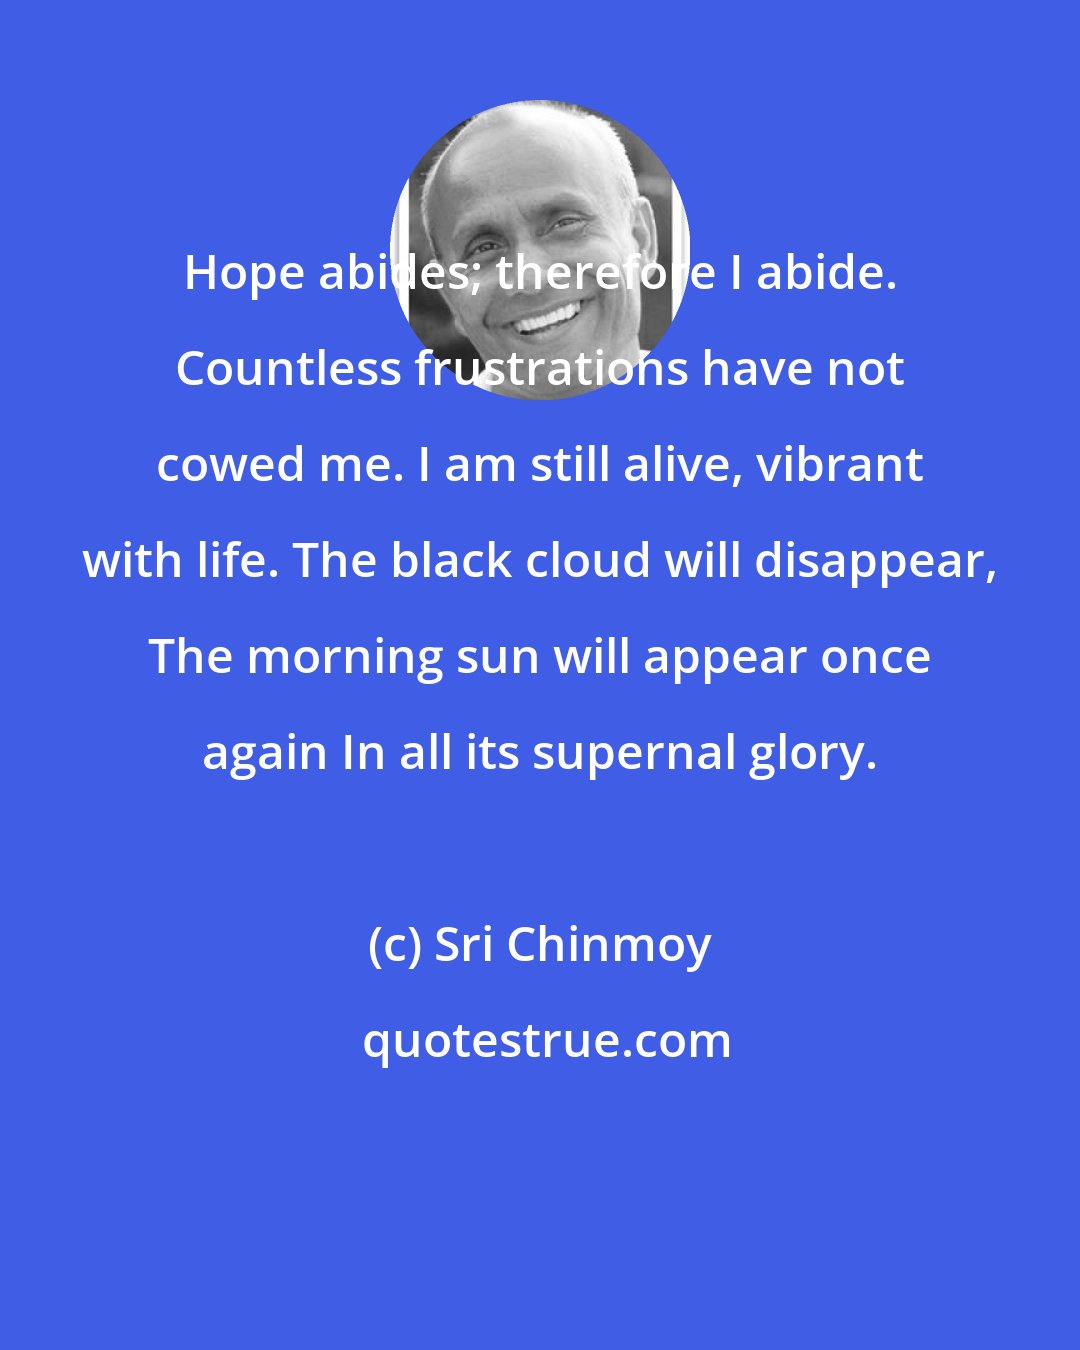 Sri Chinmoy: Hope abides; therefore I abide. Countless frustrations have not cowed me. I am still alive, vibrant with life. The black cloud will disappear, The morning sun will appear once again In all its supernal glory.